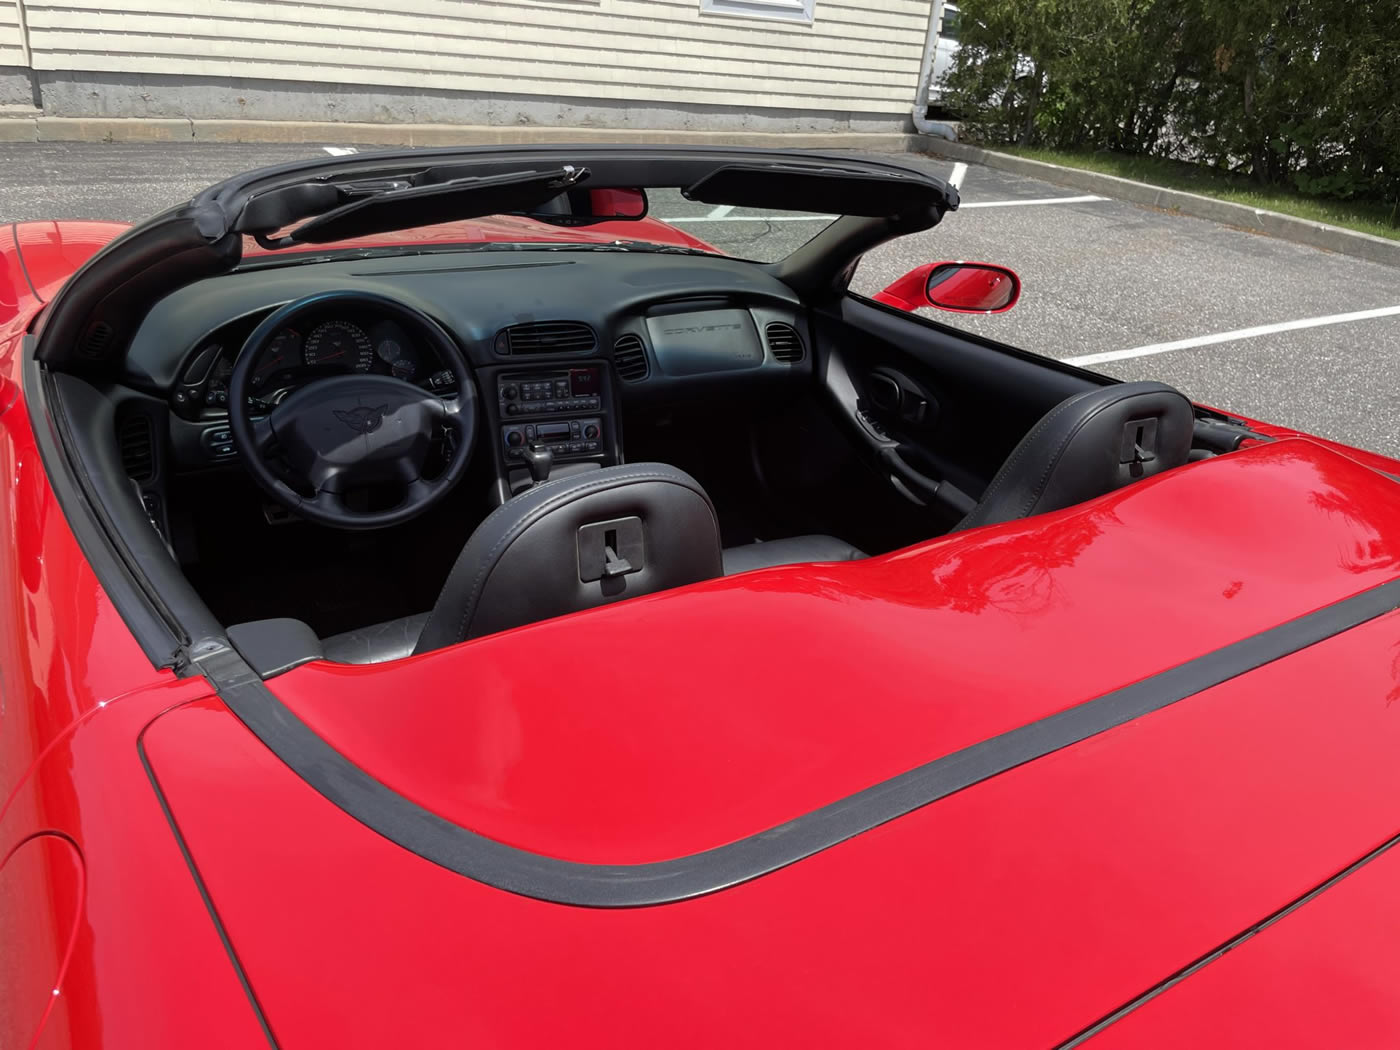 2002 Corvette Convertible in Torch Red